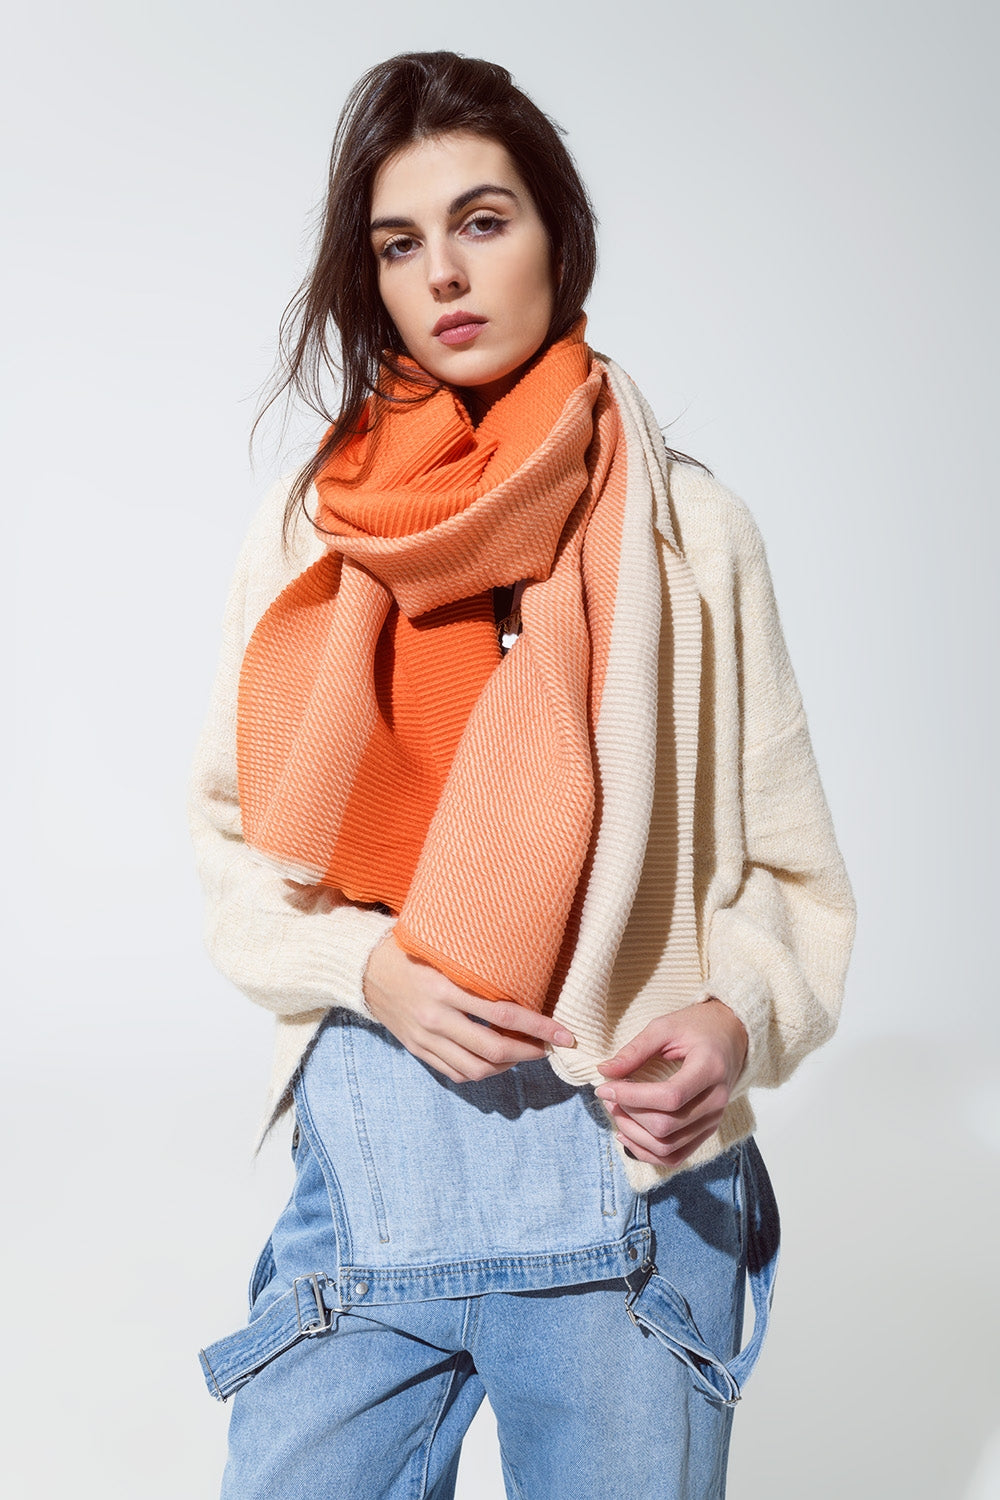 Q2 Thin scarf with mixed knits in shades of orange